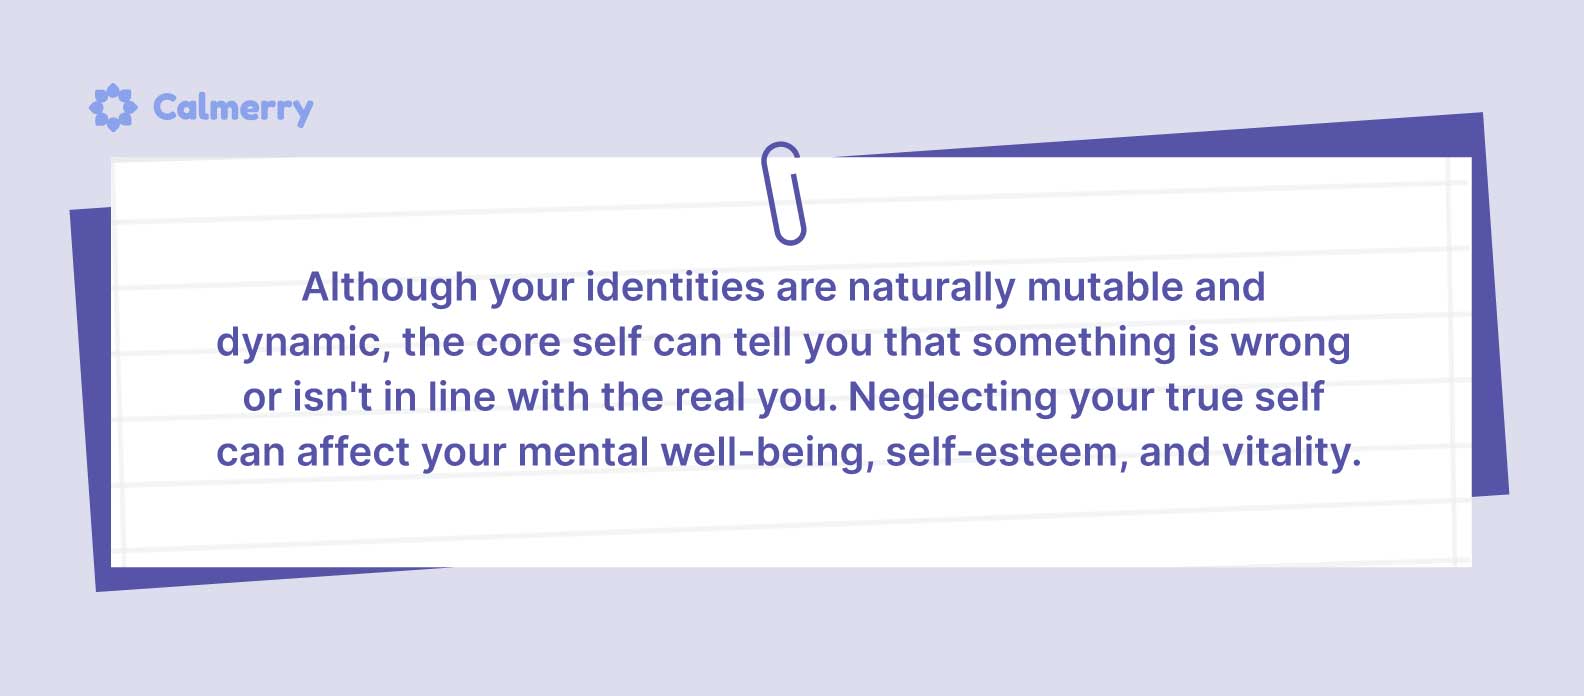 Neglecting your true self can affect your mental well-being, self-esteem, and vitality